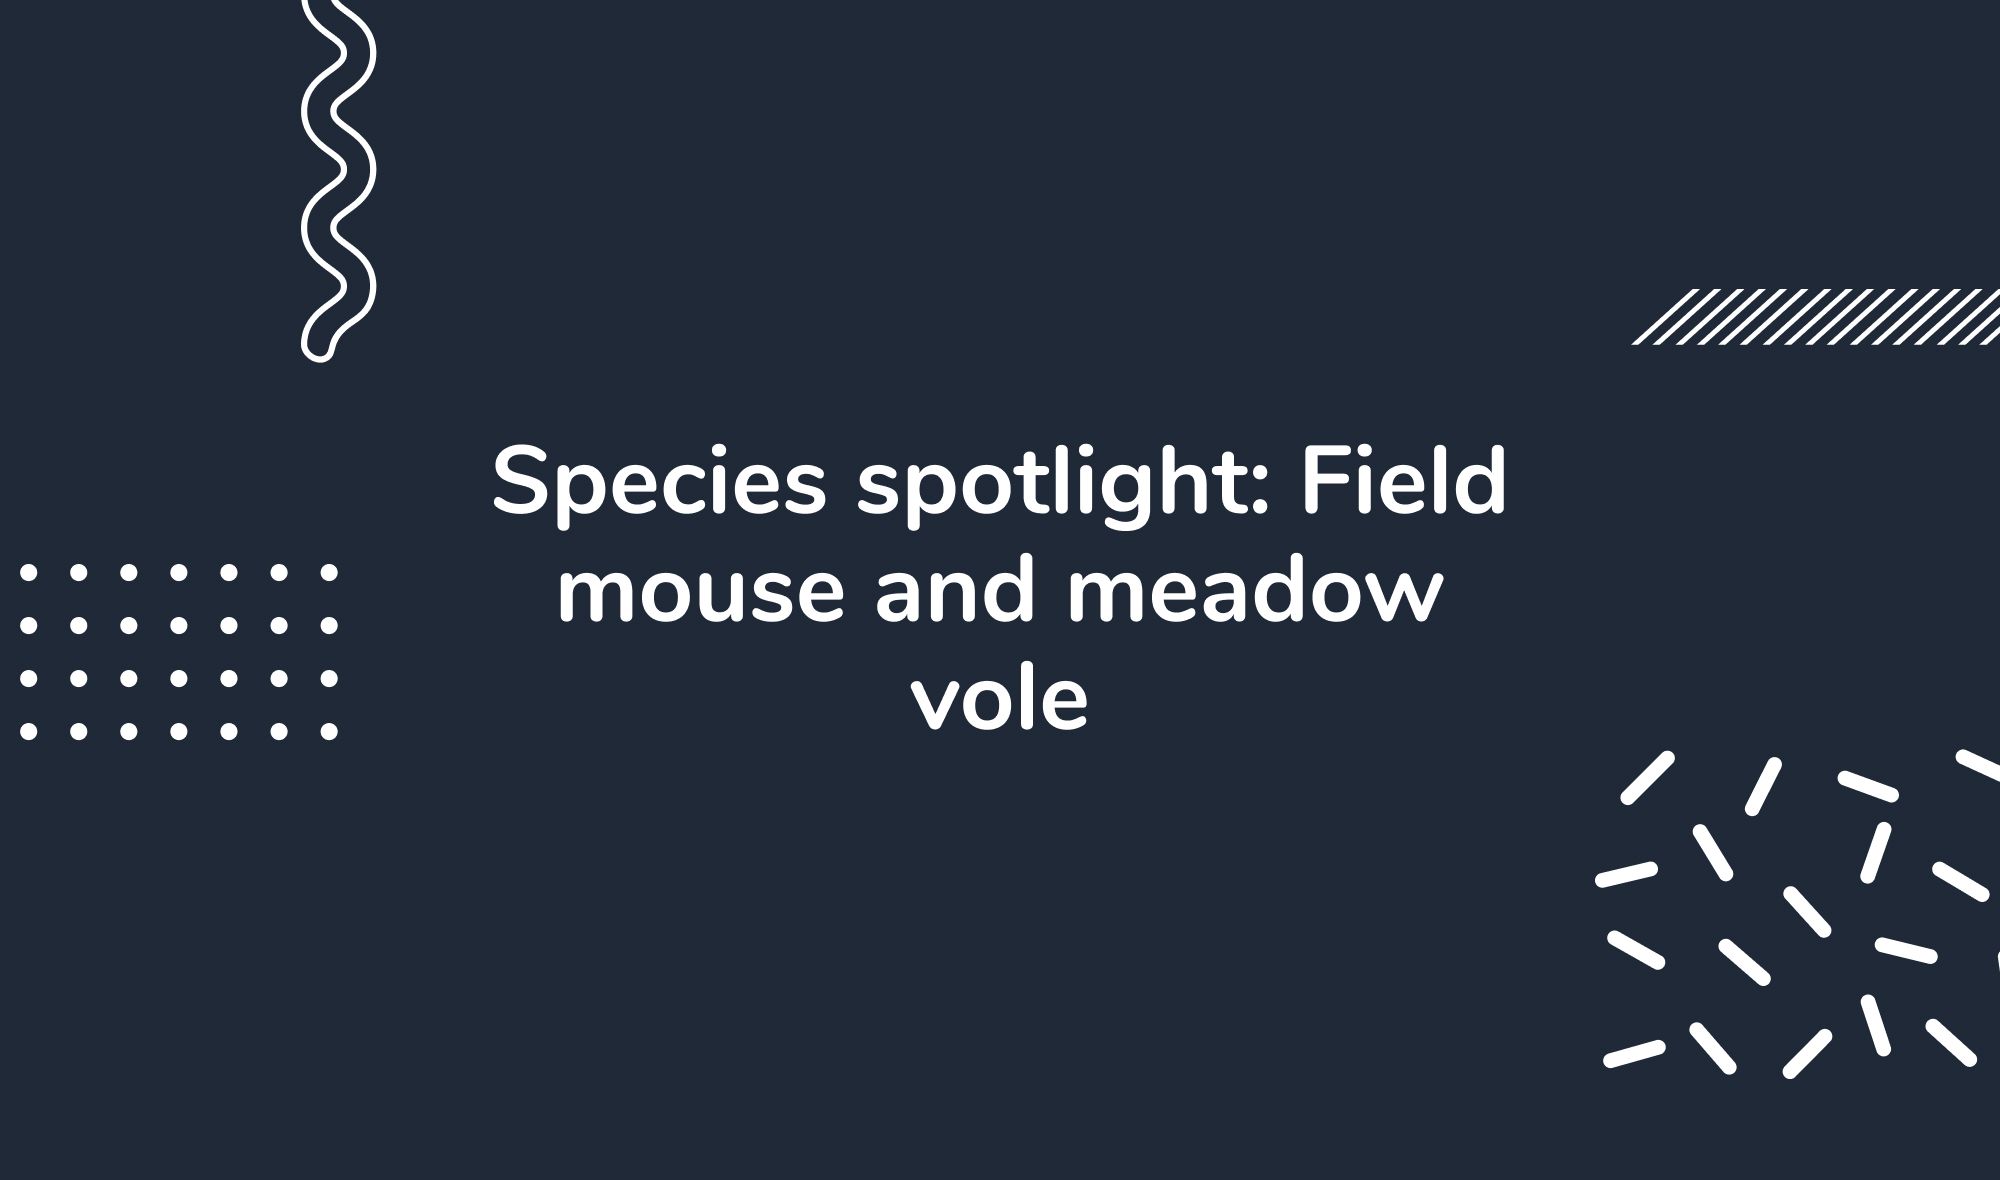 Species spotlight: Field mouse and meadow vole